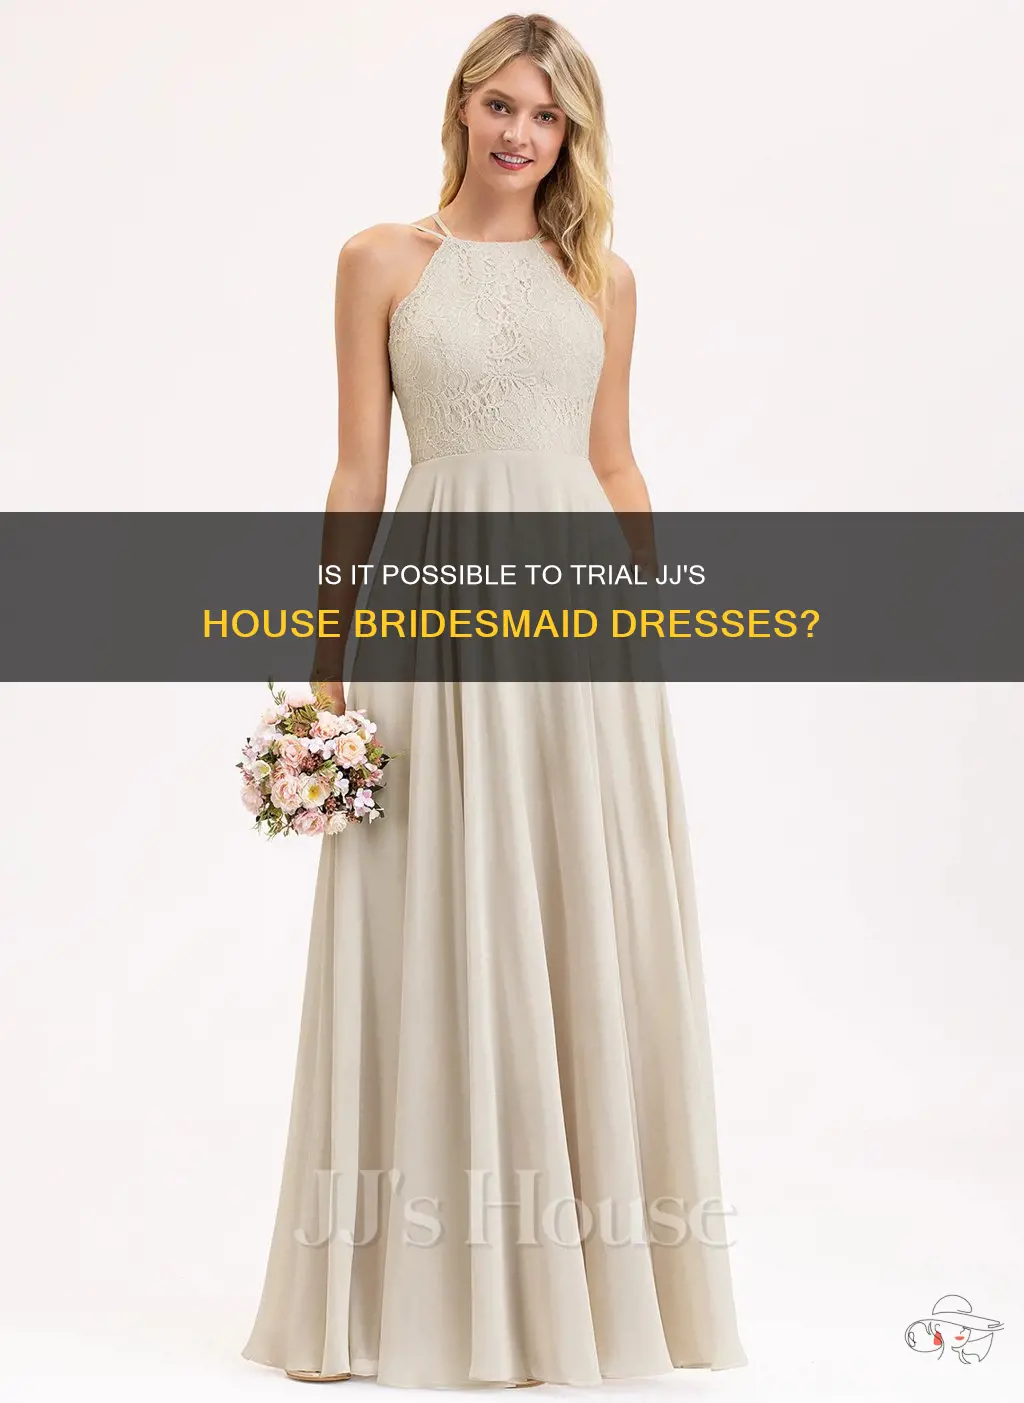 Is It Possible To Trial Jj's House Bridesmaid Dresses? | ShunVogue